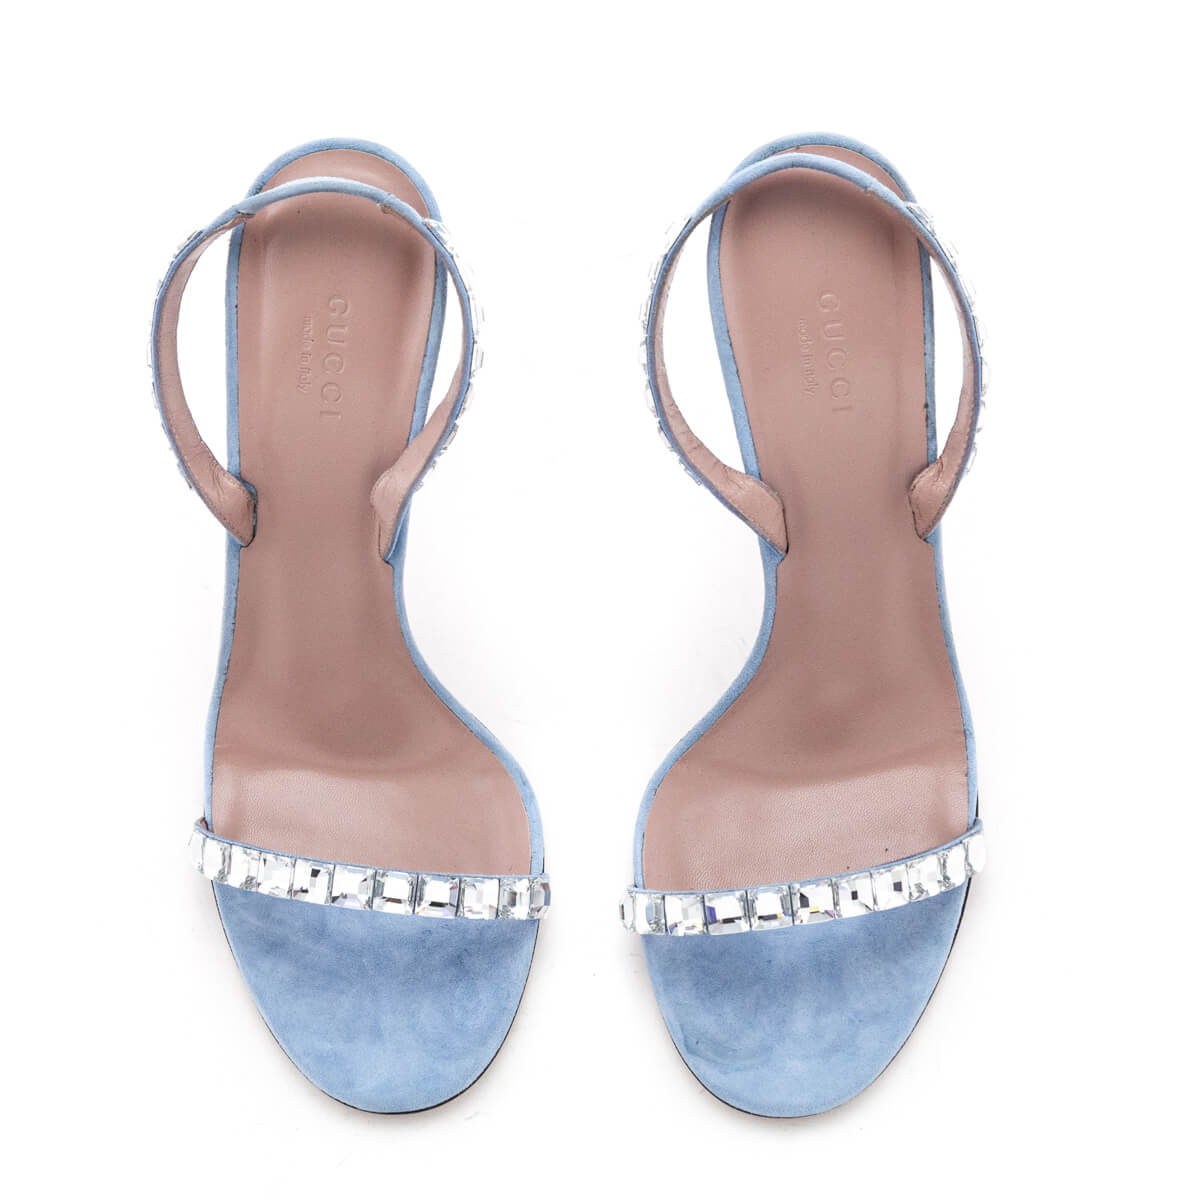 Gucci Light Blue Kid Scamosciato Crystal Ankle Slingback Sandals Size US 9.5 | EU 39.5 - Love that Bag etc - Preowned Authentic Designer Handbags & Preloved Fashions